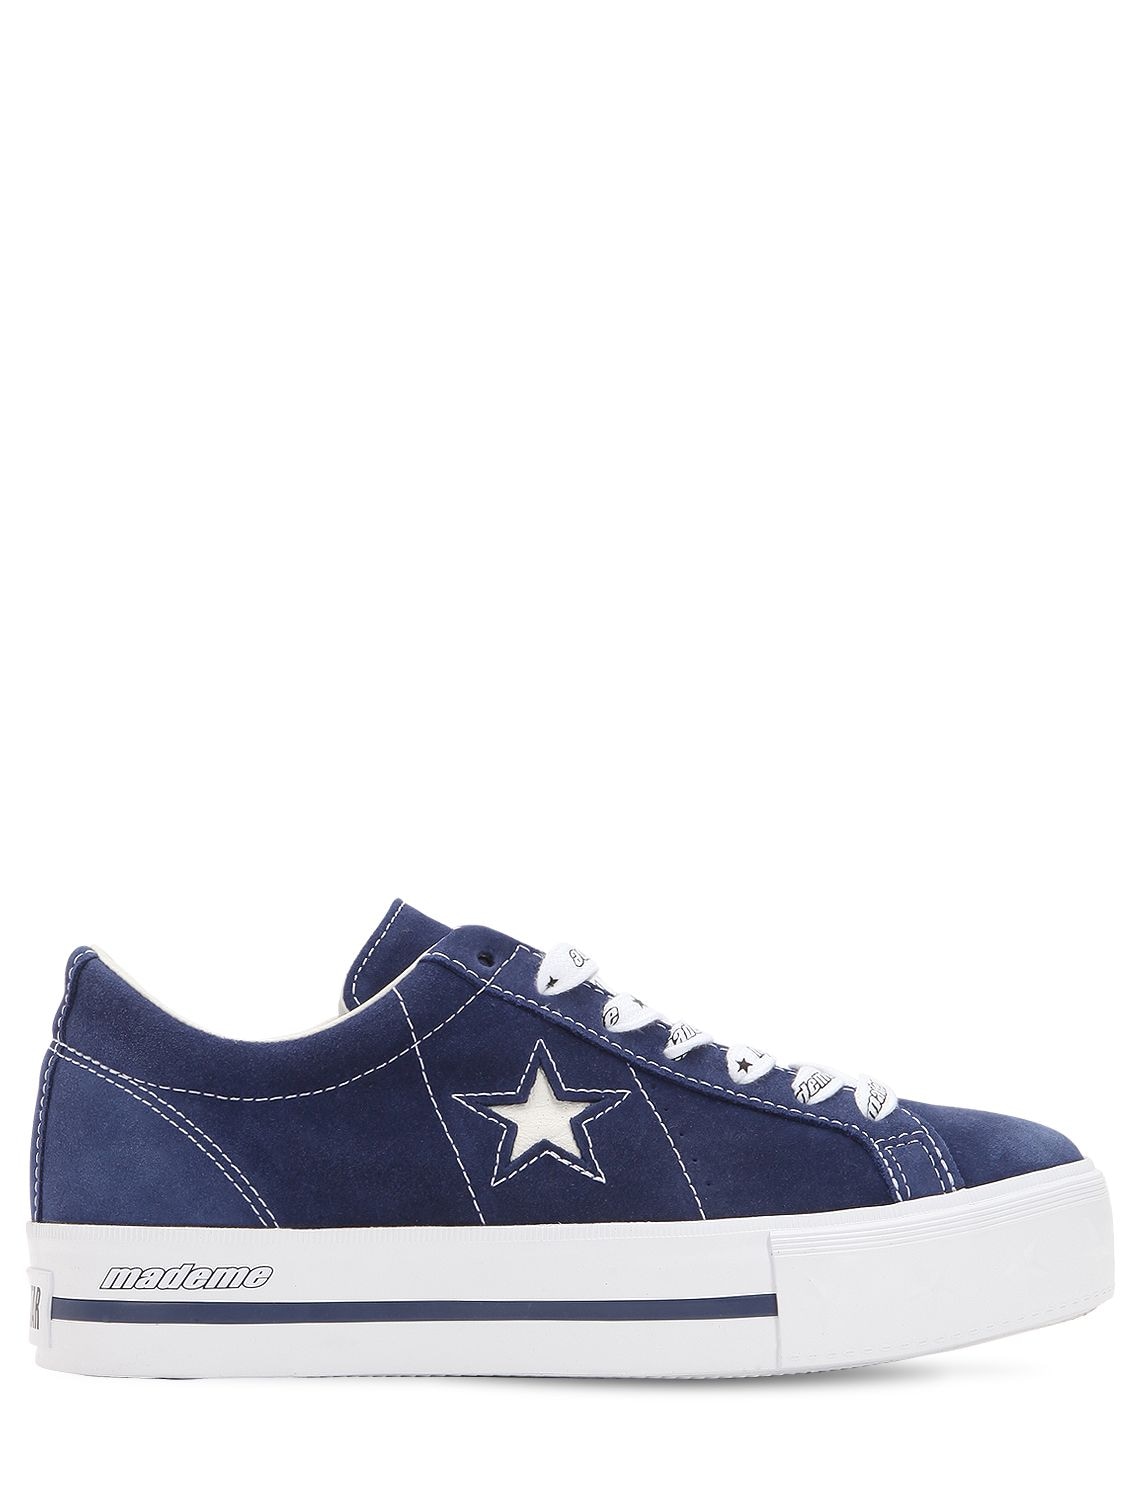 Converse Mademe One Star Suede Platform Sneakers In Medieval Blue